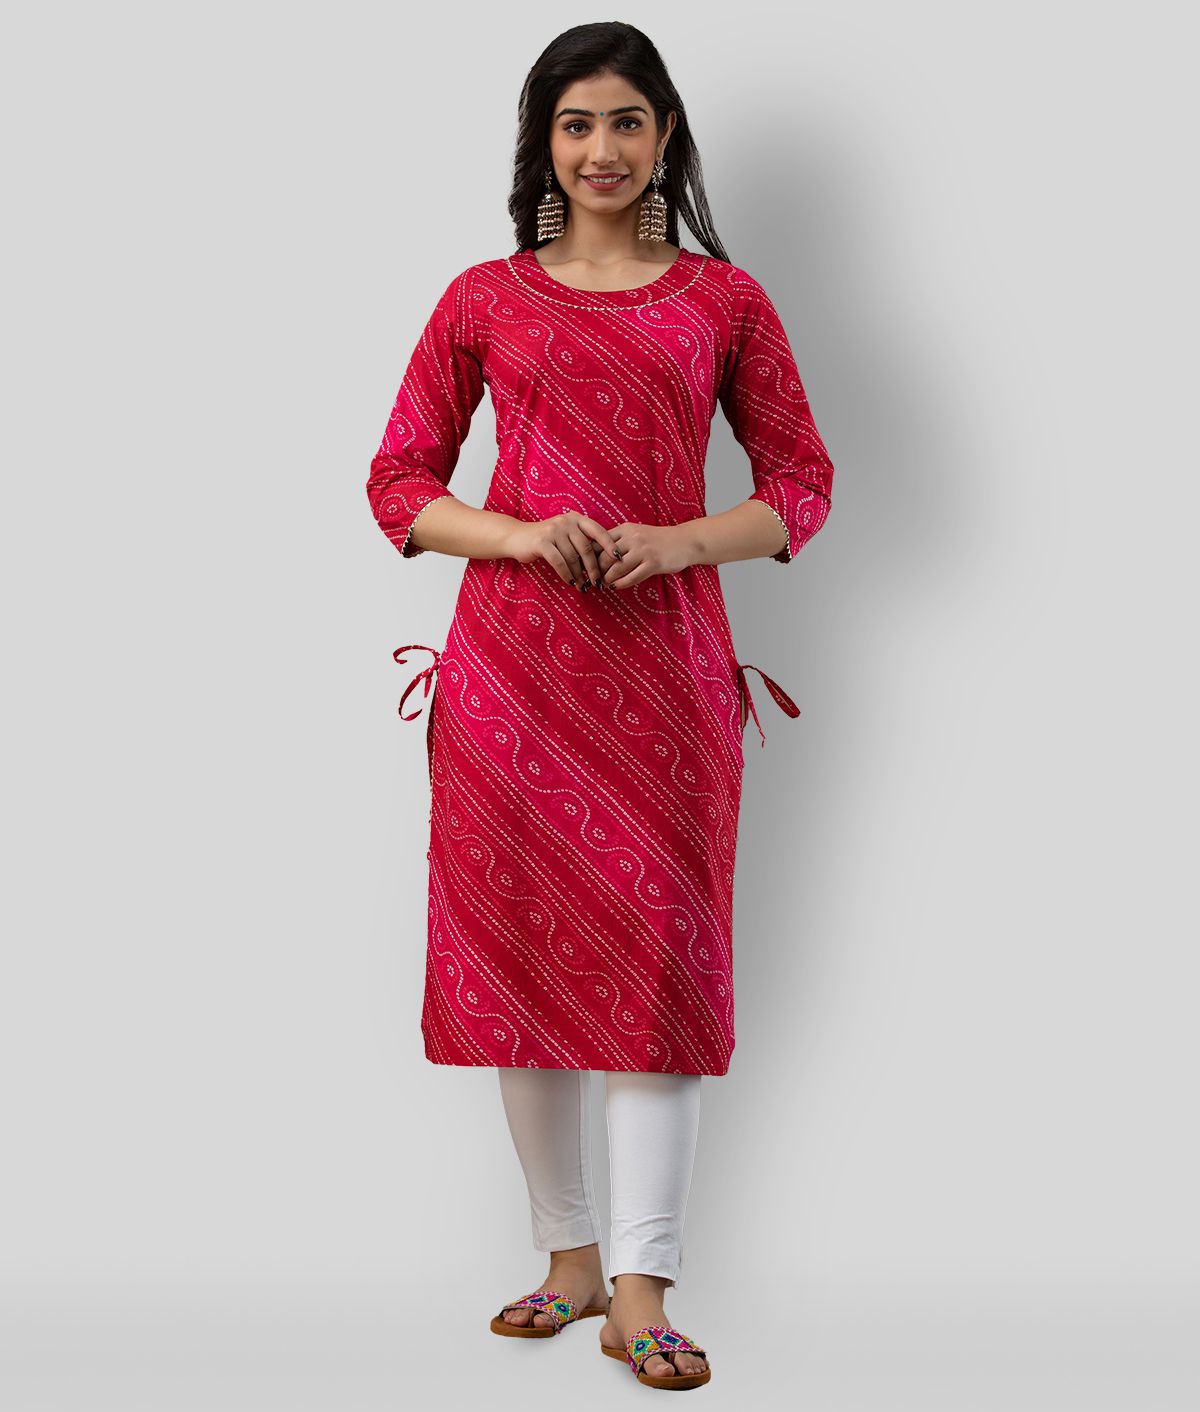 SVARCHI  Beige Viscose Womens Aline Kurti  Pack of 1   Buy SVARCHI   Beige Viscose Womens Aline Kurti  Pack of 1  Online at Best Prices in  India on Snapdeal